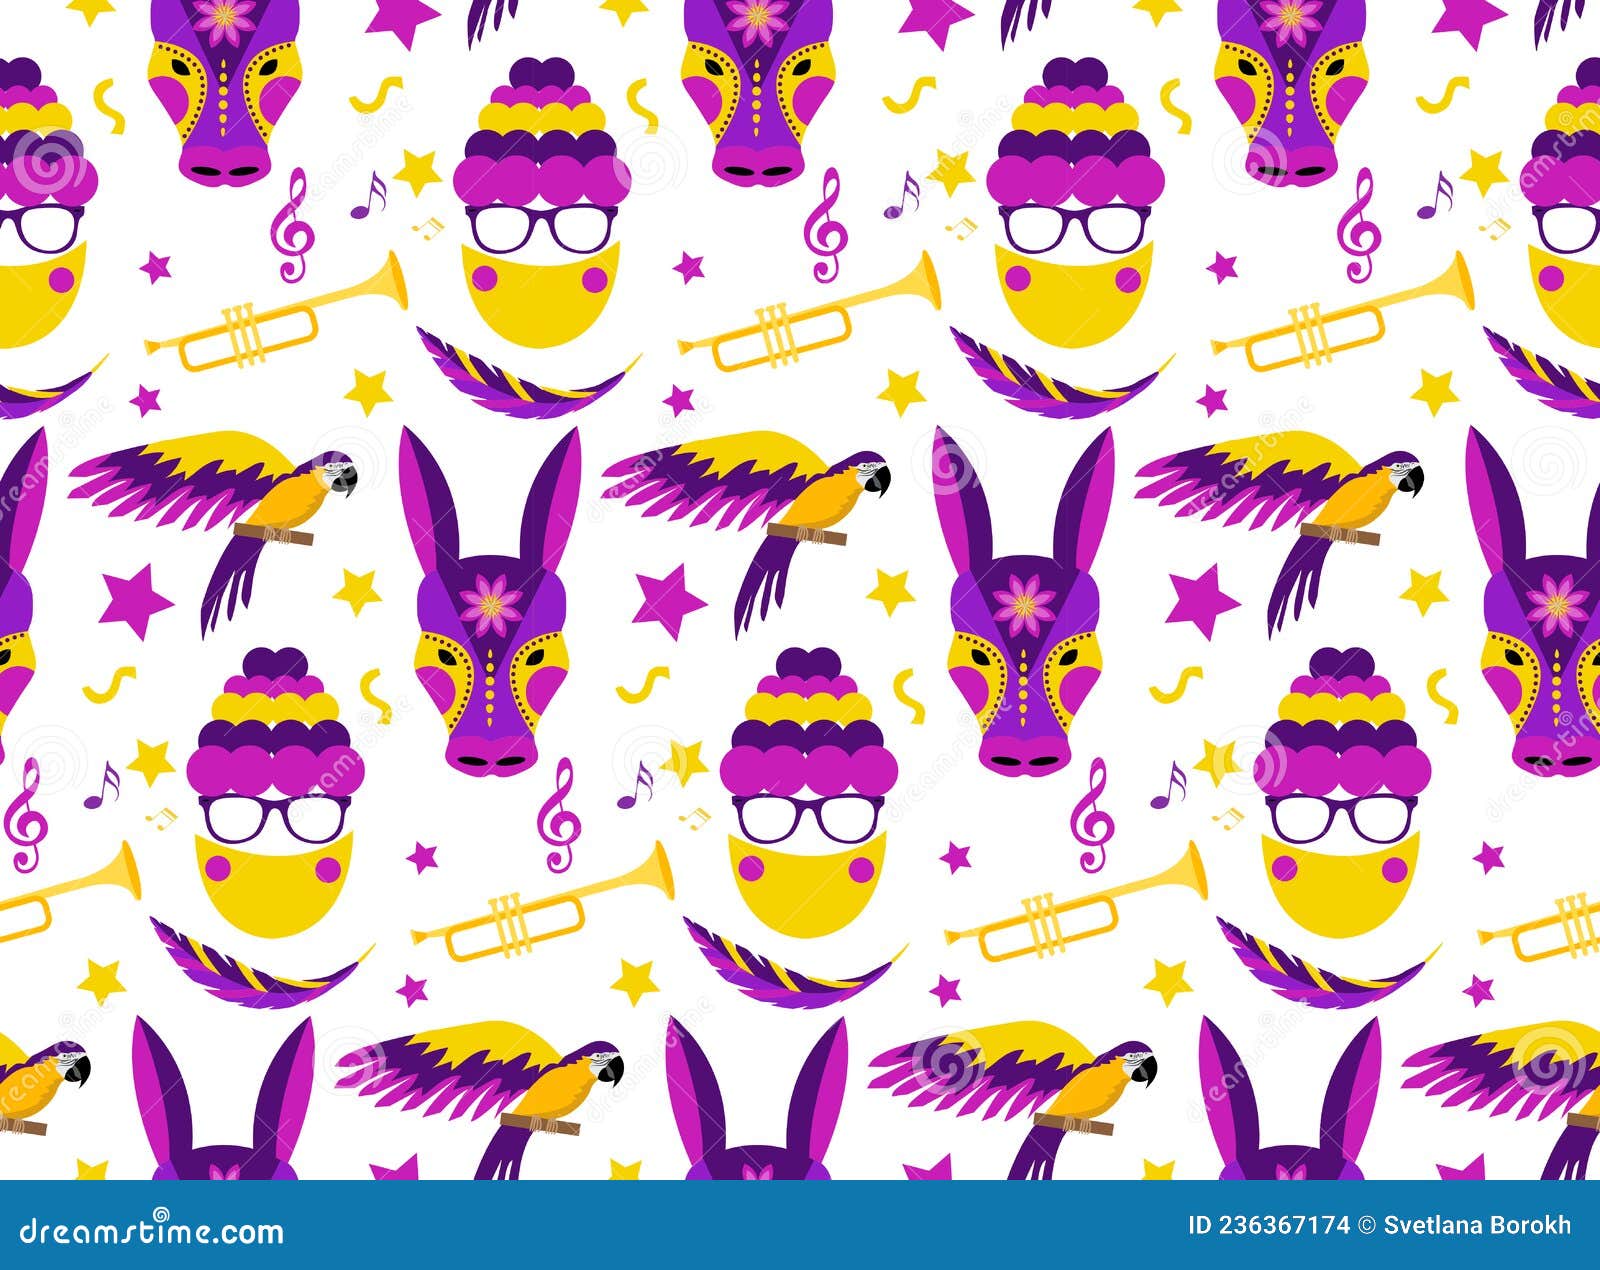 barranquilla carnival seamless pattern. colombian carnaval party endless texture, background, wallpaper. 